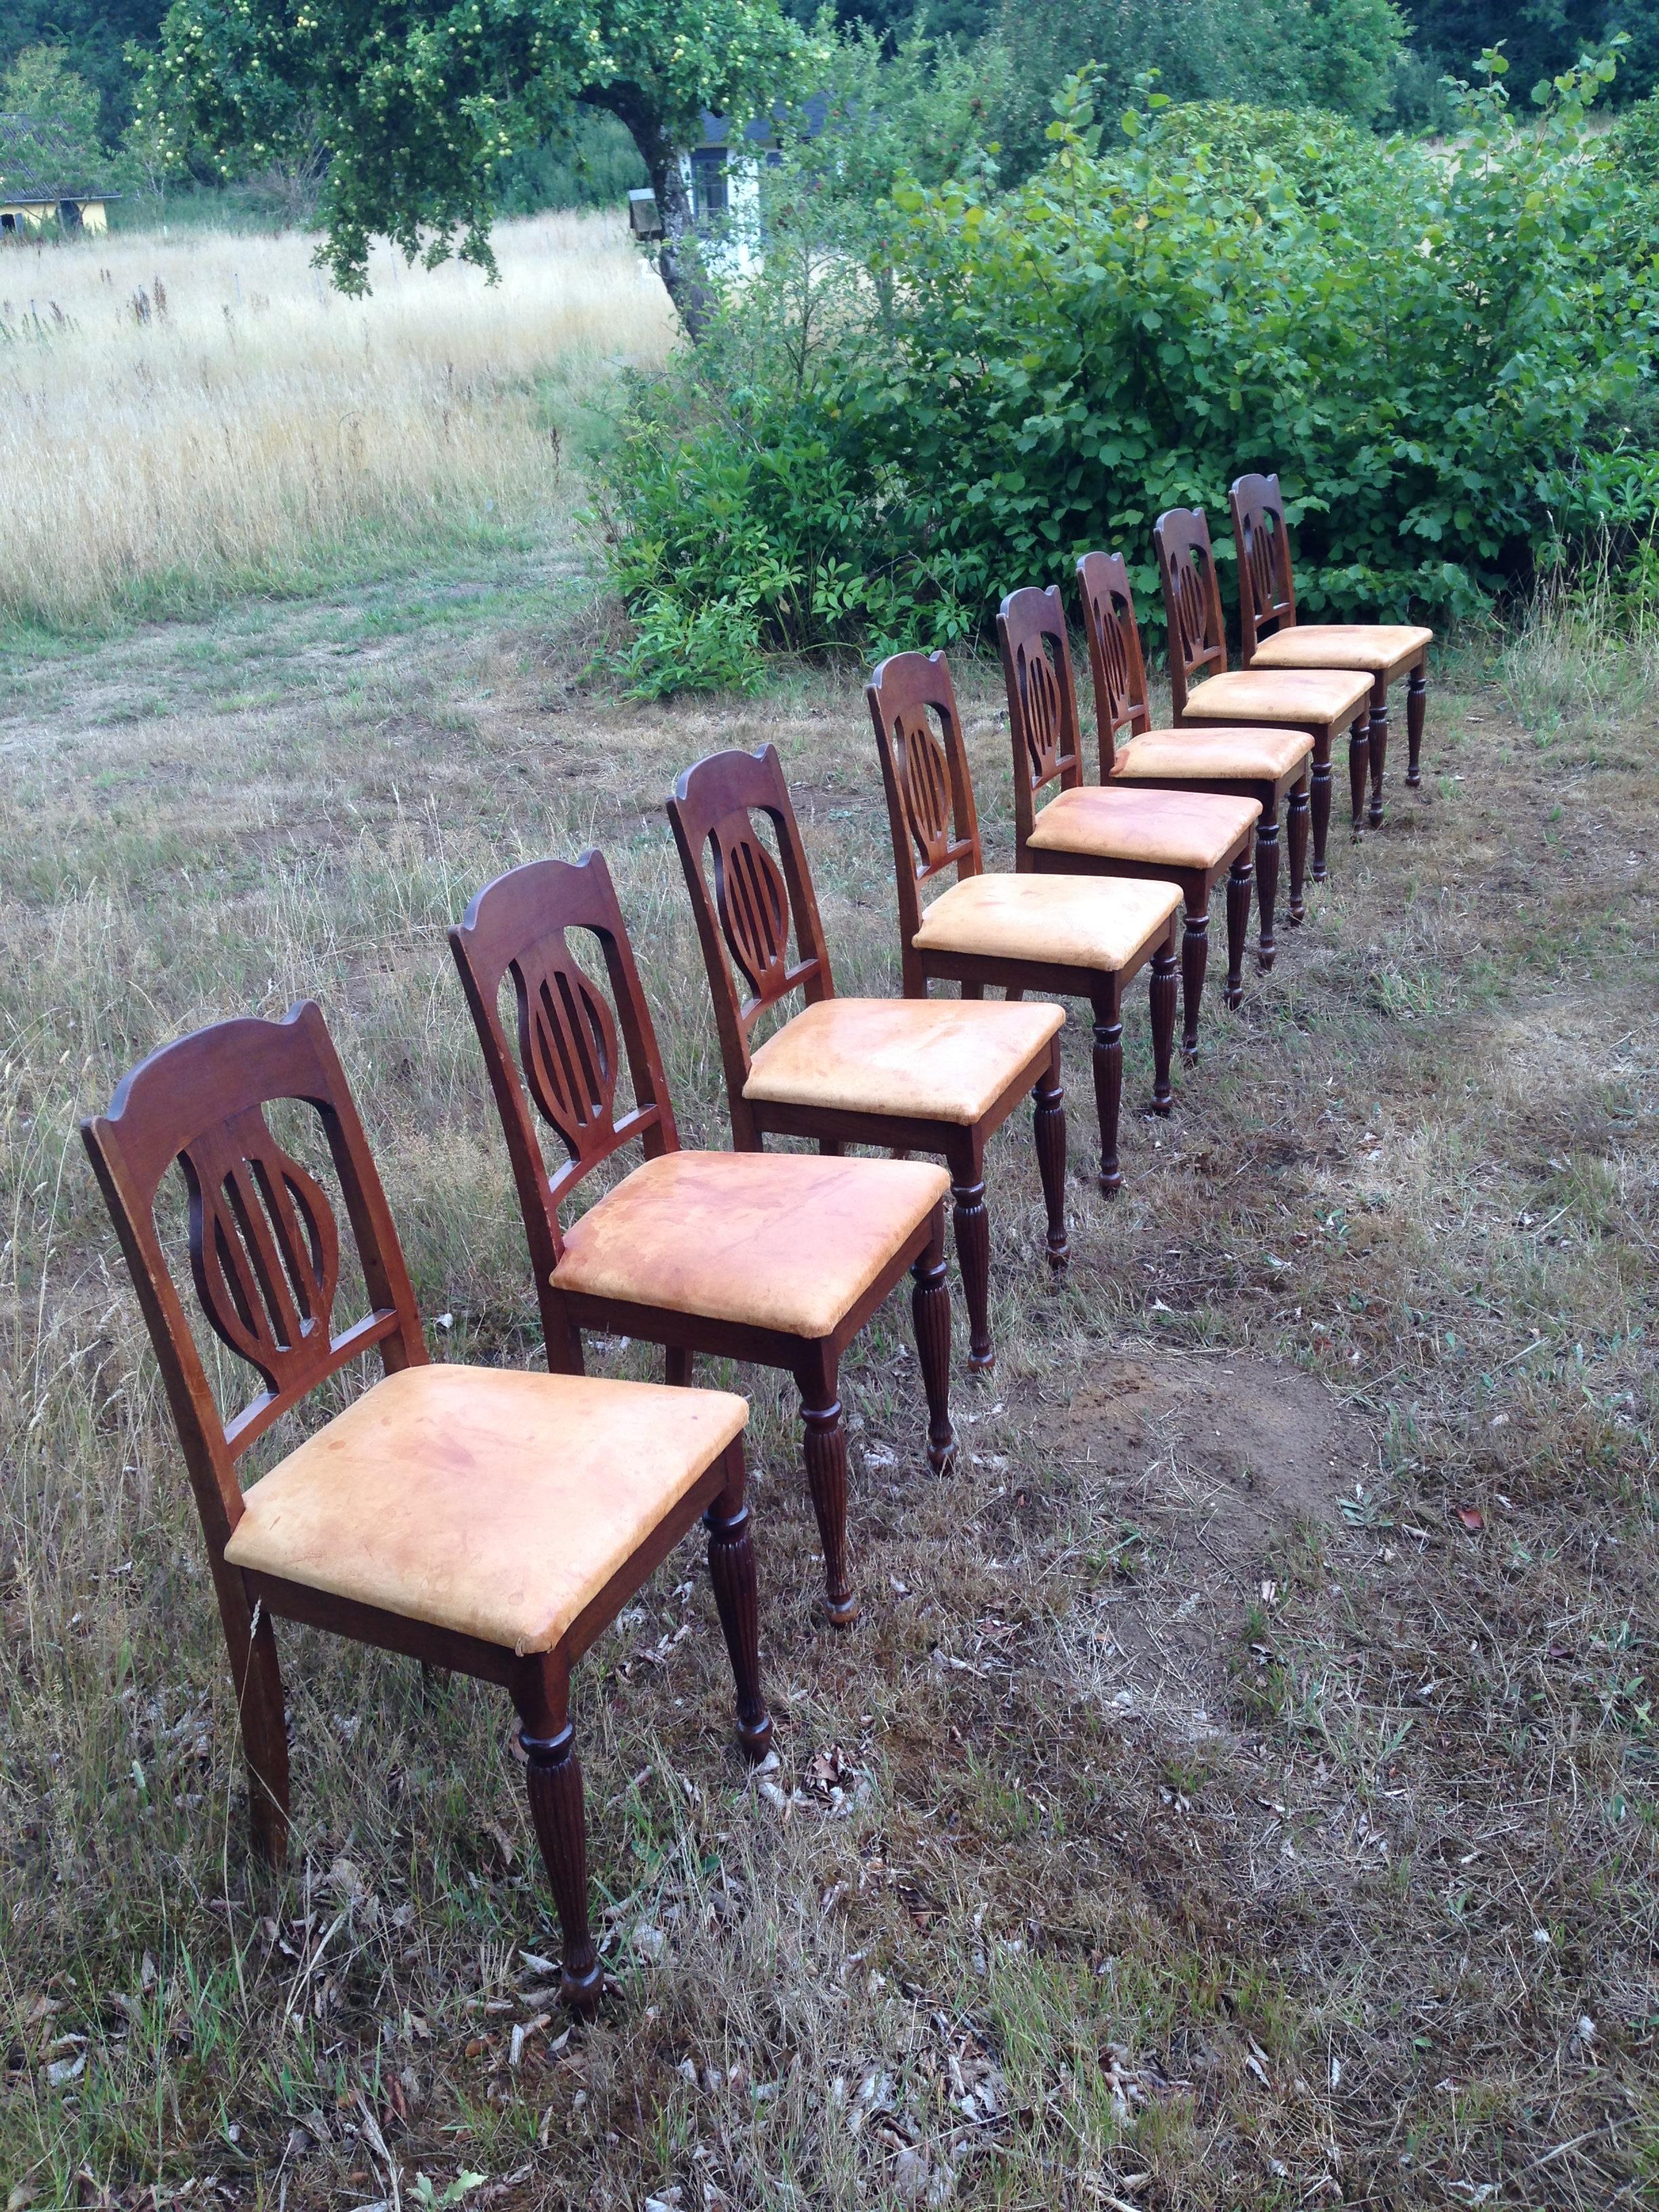 Danish Set of 8 Art Nouveau Chairs in Mahogany and Light Oxhide Seats, 1910s-1920s For Sale